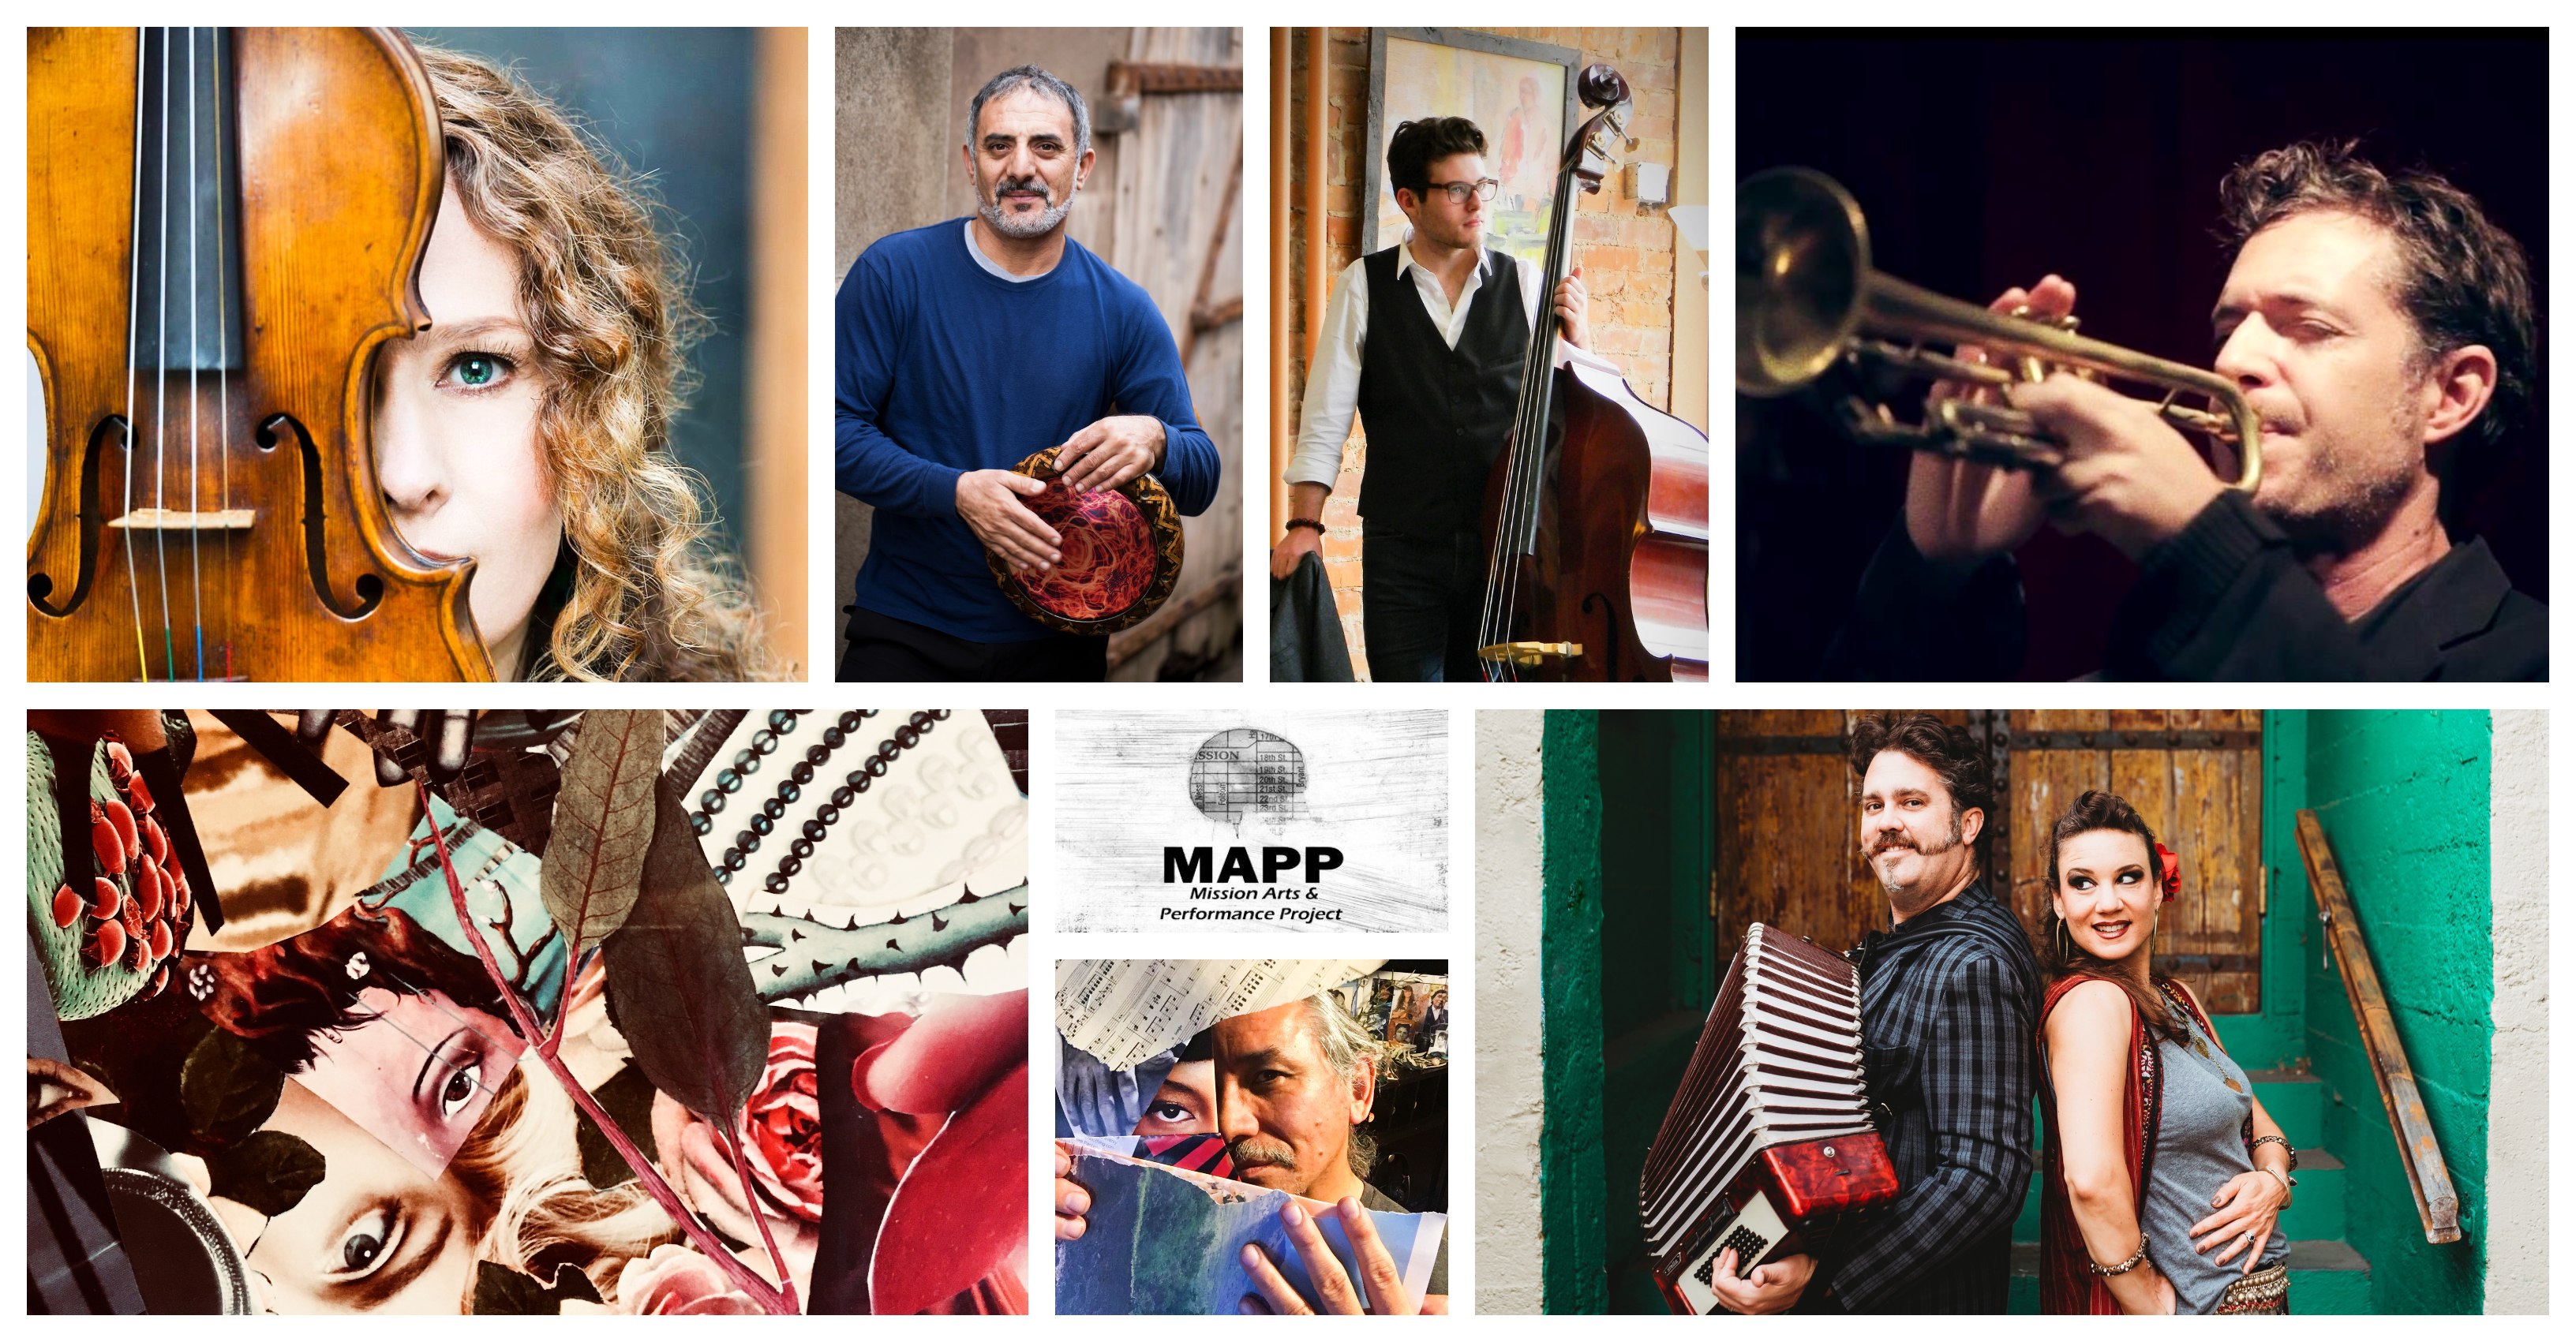 Dec. 5th | MAPP (Online): Building Community Resilience Through the Arts